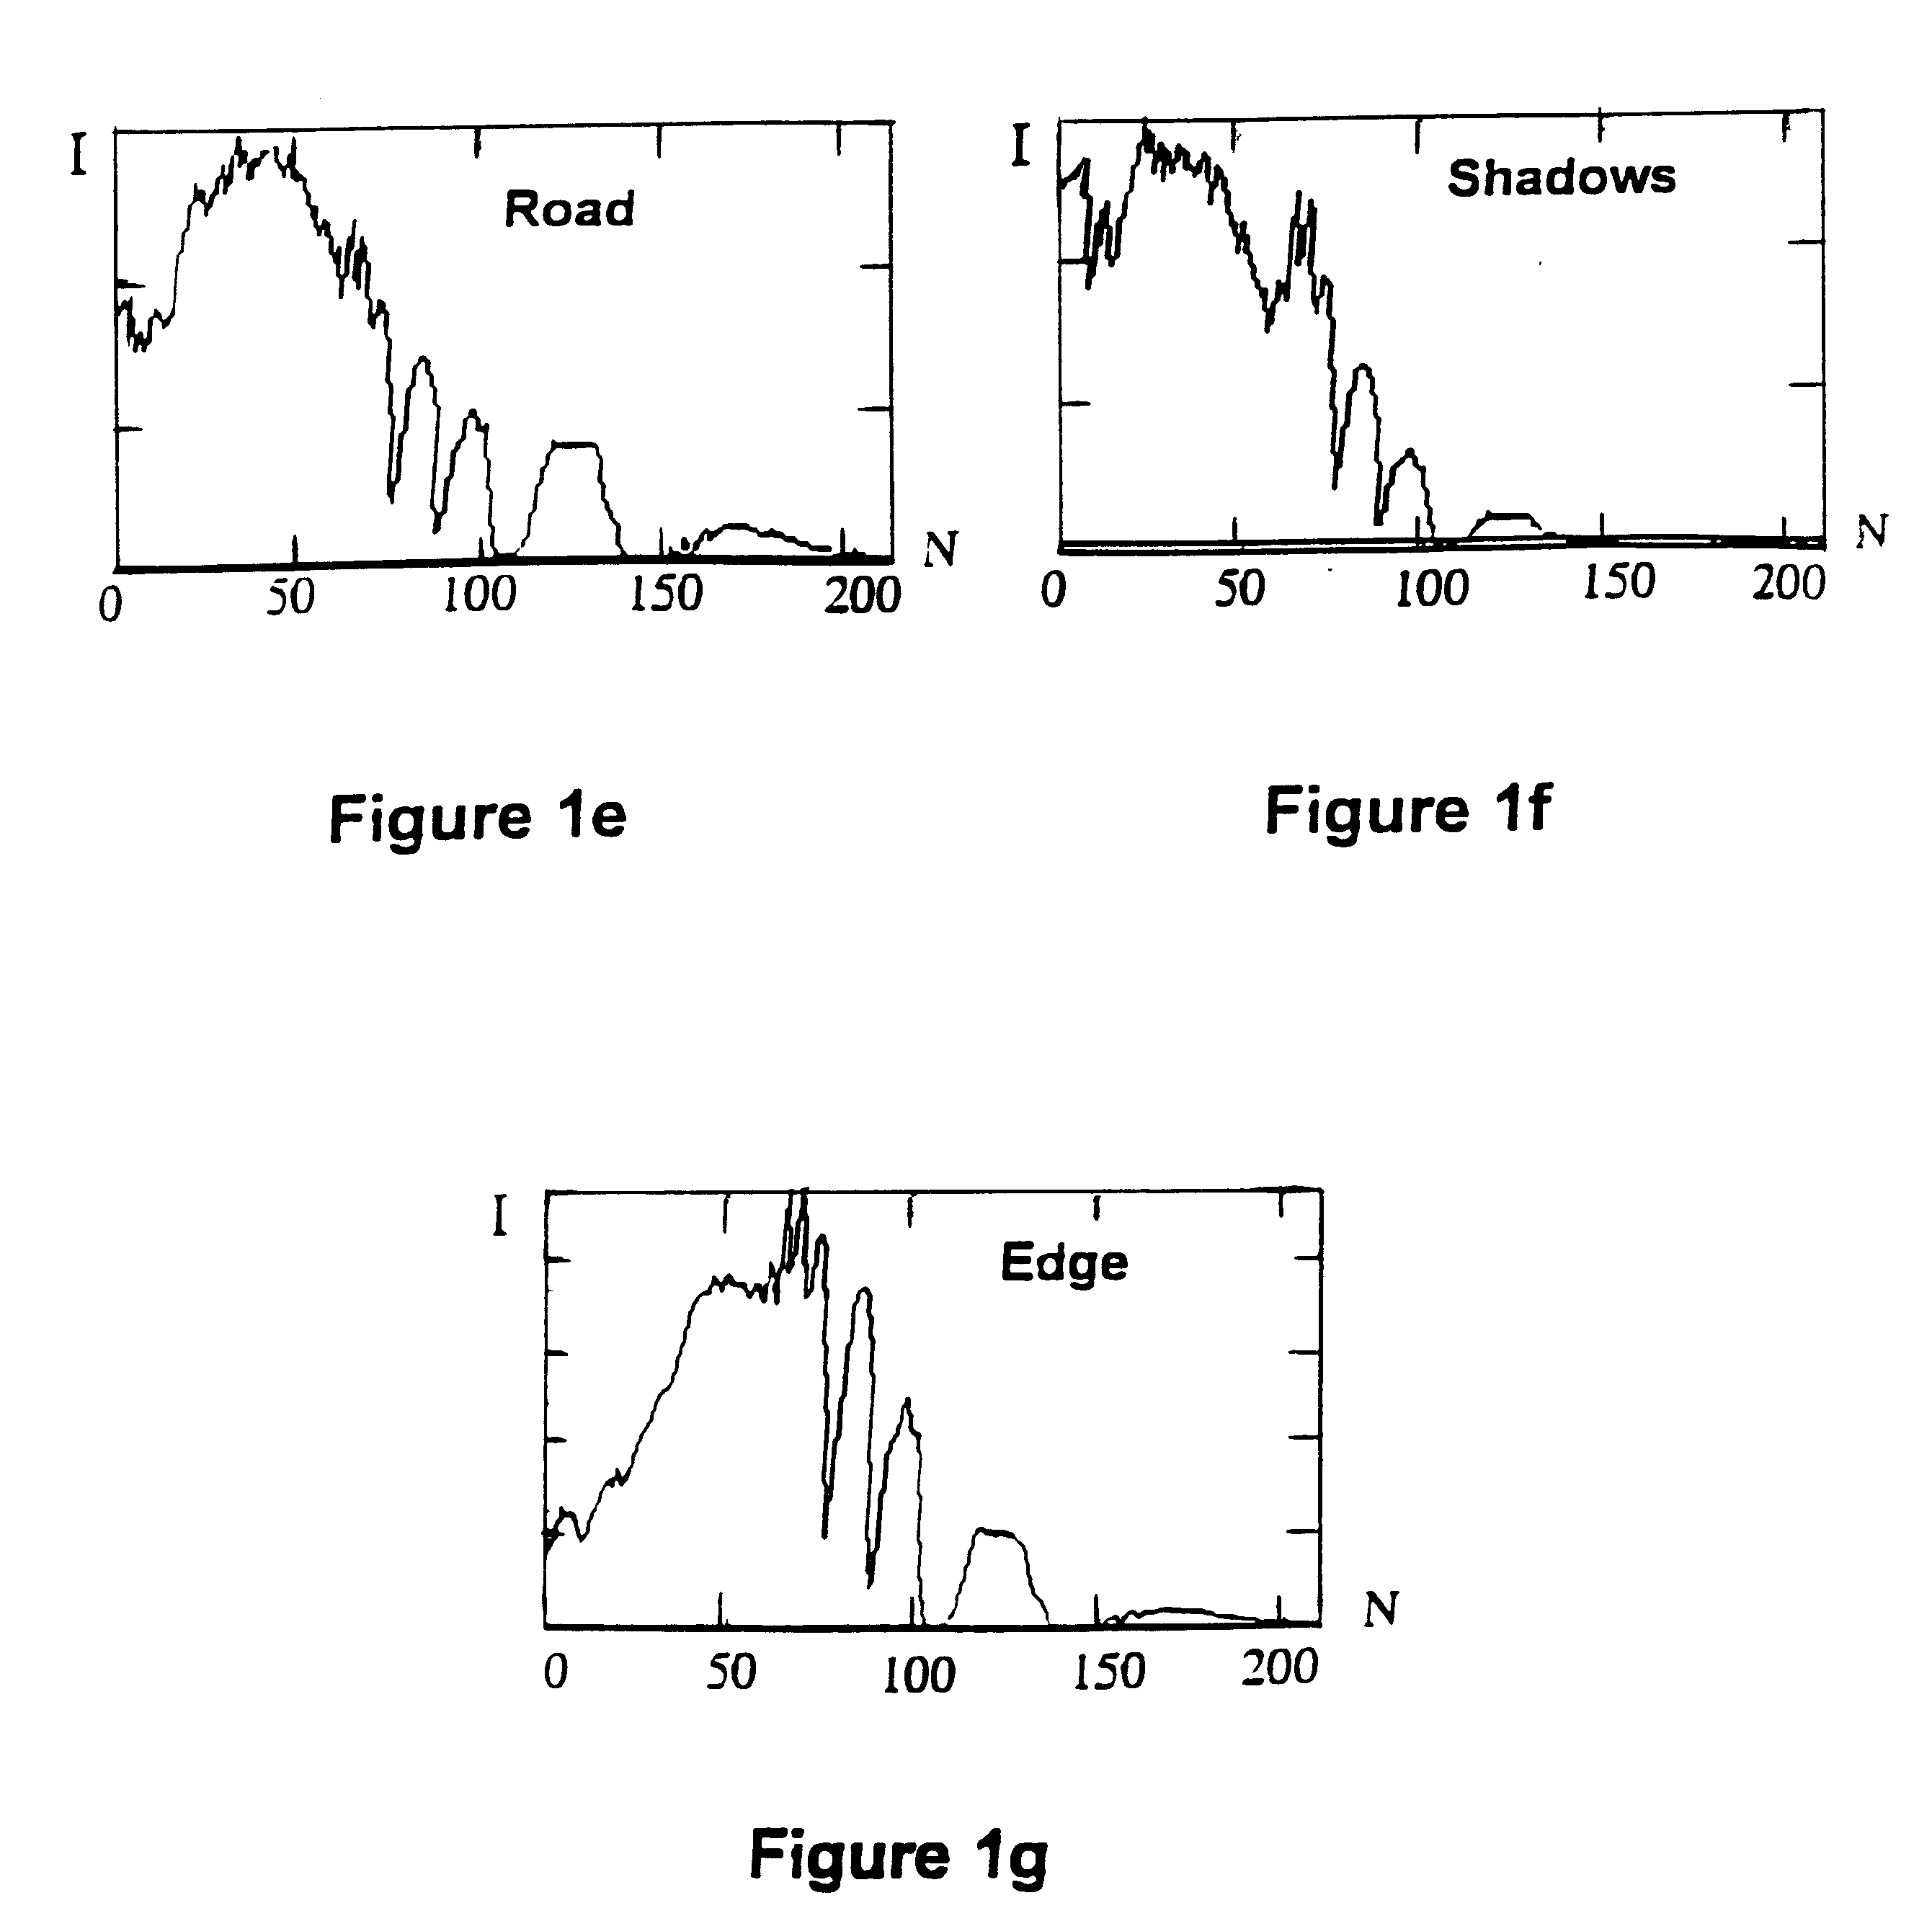 Ares method of sub-pixel target detection